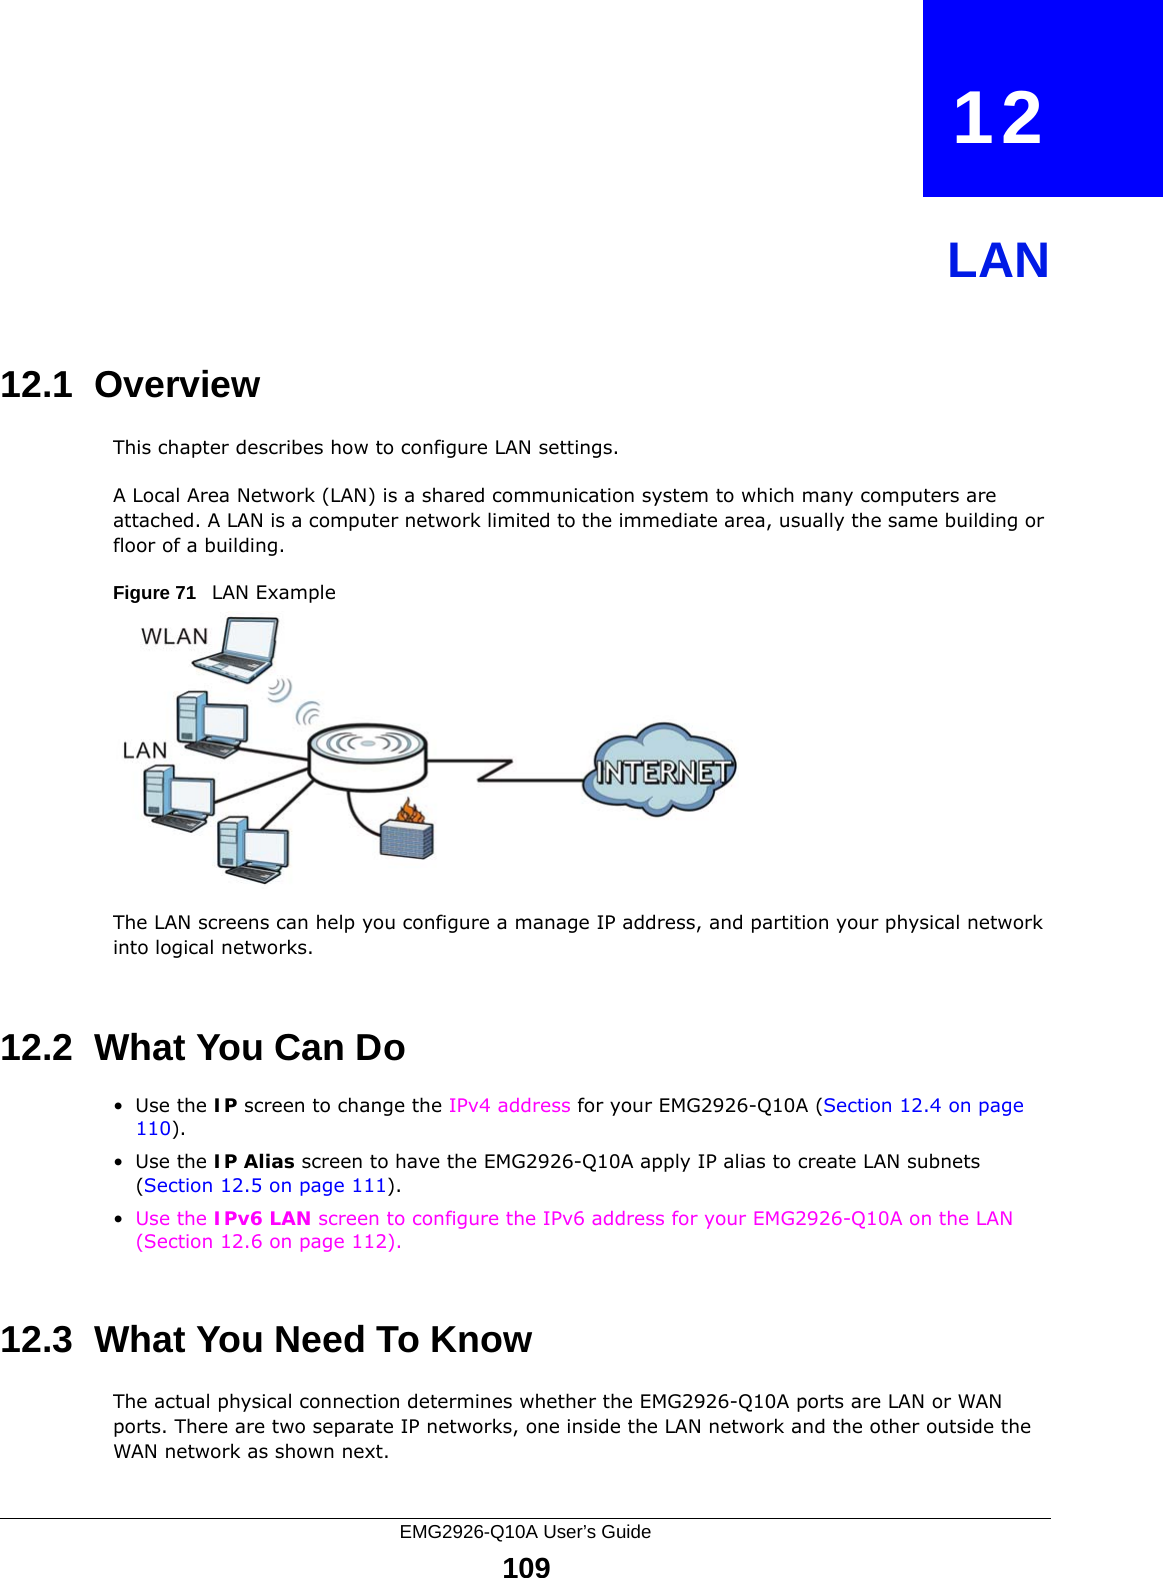 EMG2926-Q10A User’s Guide109CHAPTER   12LAN12.1  OverviewThis chapter describes how to configure LAN settings.A Local Area Network (LAN) is a shared communication system to which many computers are attached. A LAN is a computer network limited to the immediate area, usually the same building or floor of a building. Figure 71   LAN ExampleThe LAN screens can help you configure a manage IP address, and partition your physical network into logical networks.12.2  What You Can Do•Use the IP screen to change the IPv4 address for your EMG2926-Q10A (Section 12.4 on page 110).•Use the IP Alias screen to have the EMG2926-Q10A apply IP alias to create LAN subnets (Section 12.5 on page 111).•Use the IPv6 LAN screen to configure the IPv6 address for your EMG2926-Q10A on the LAN (Section 12.6 on page 112).12.3  What You Need To KnowThe actual physical connection determines whether the EMG2926-Q10A ports are LAN or WAN ports. There are two separate IP networks, one inside the LAN network and the other outside the WAN network as shown next.